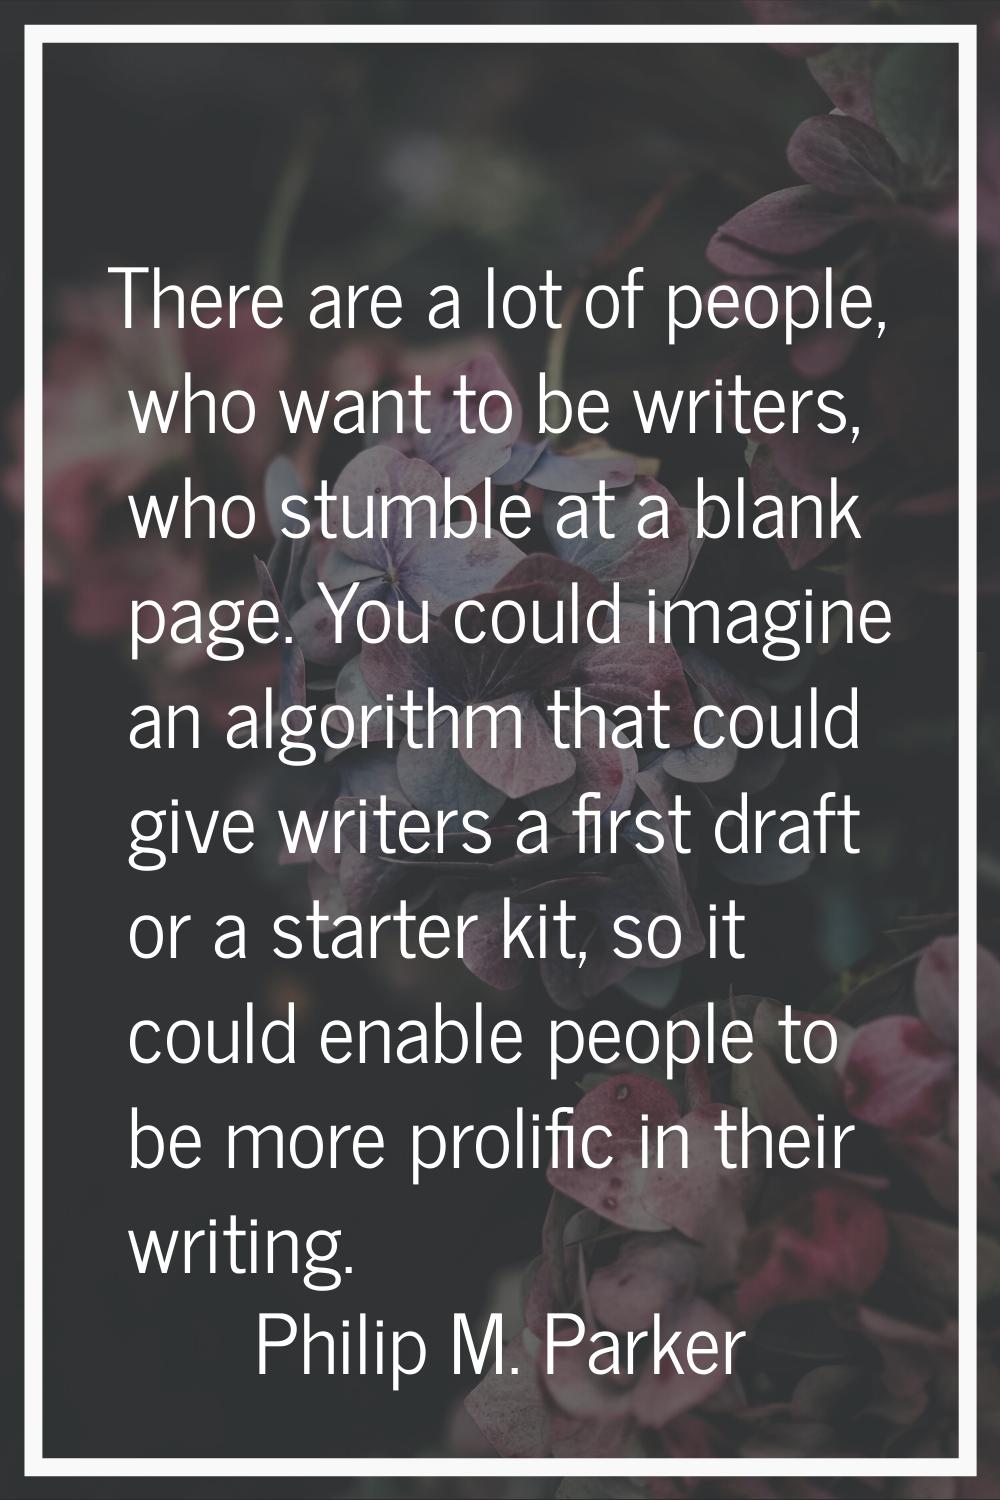 There are a lot of people, who want to be writers, who stumble at a blank page. You could imagine a